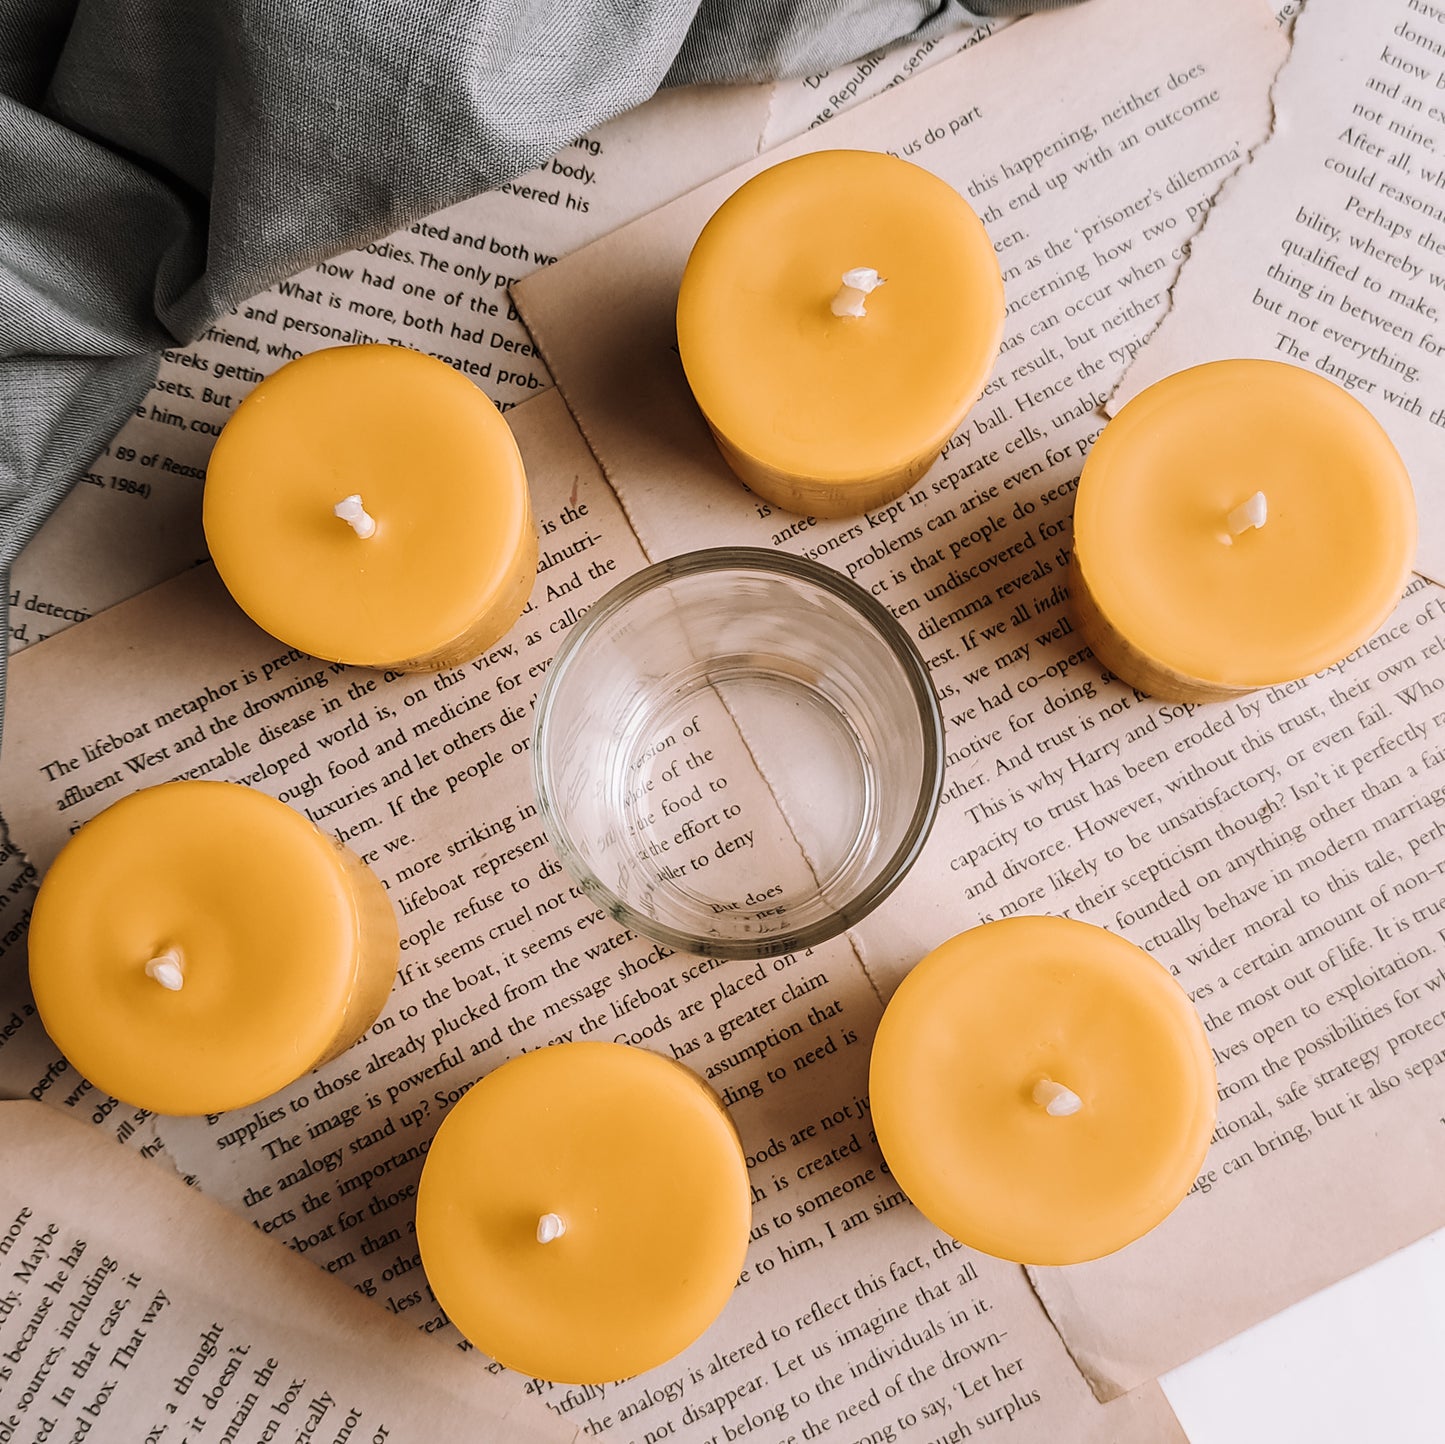 Beeswax Votive candle, long burning time, pure beeswax candles, handmade in the UK, bees wax votives beeswaxcandle.co.uk